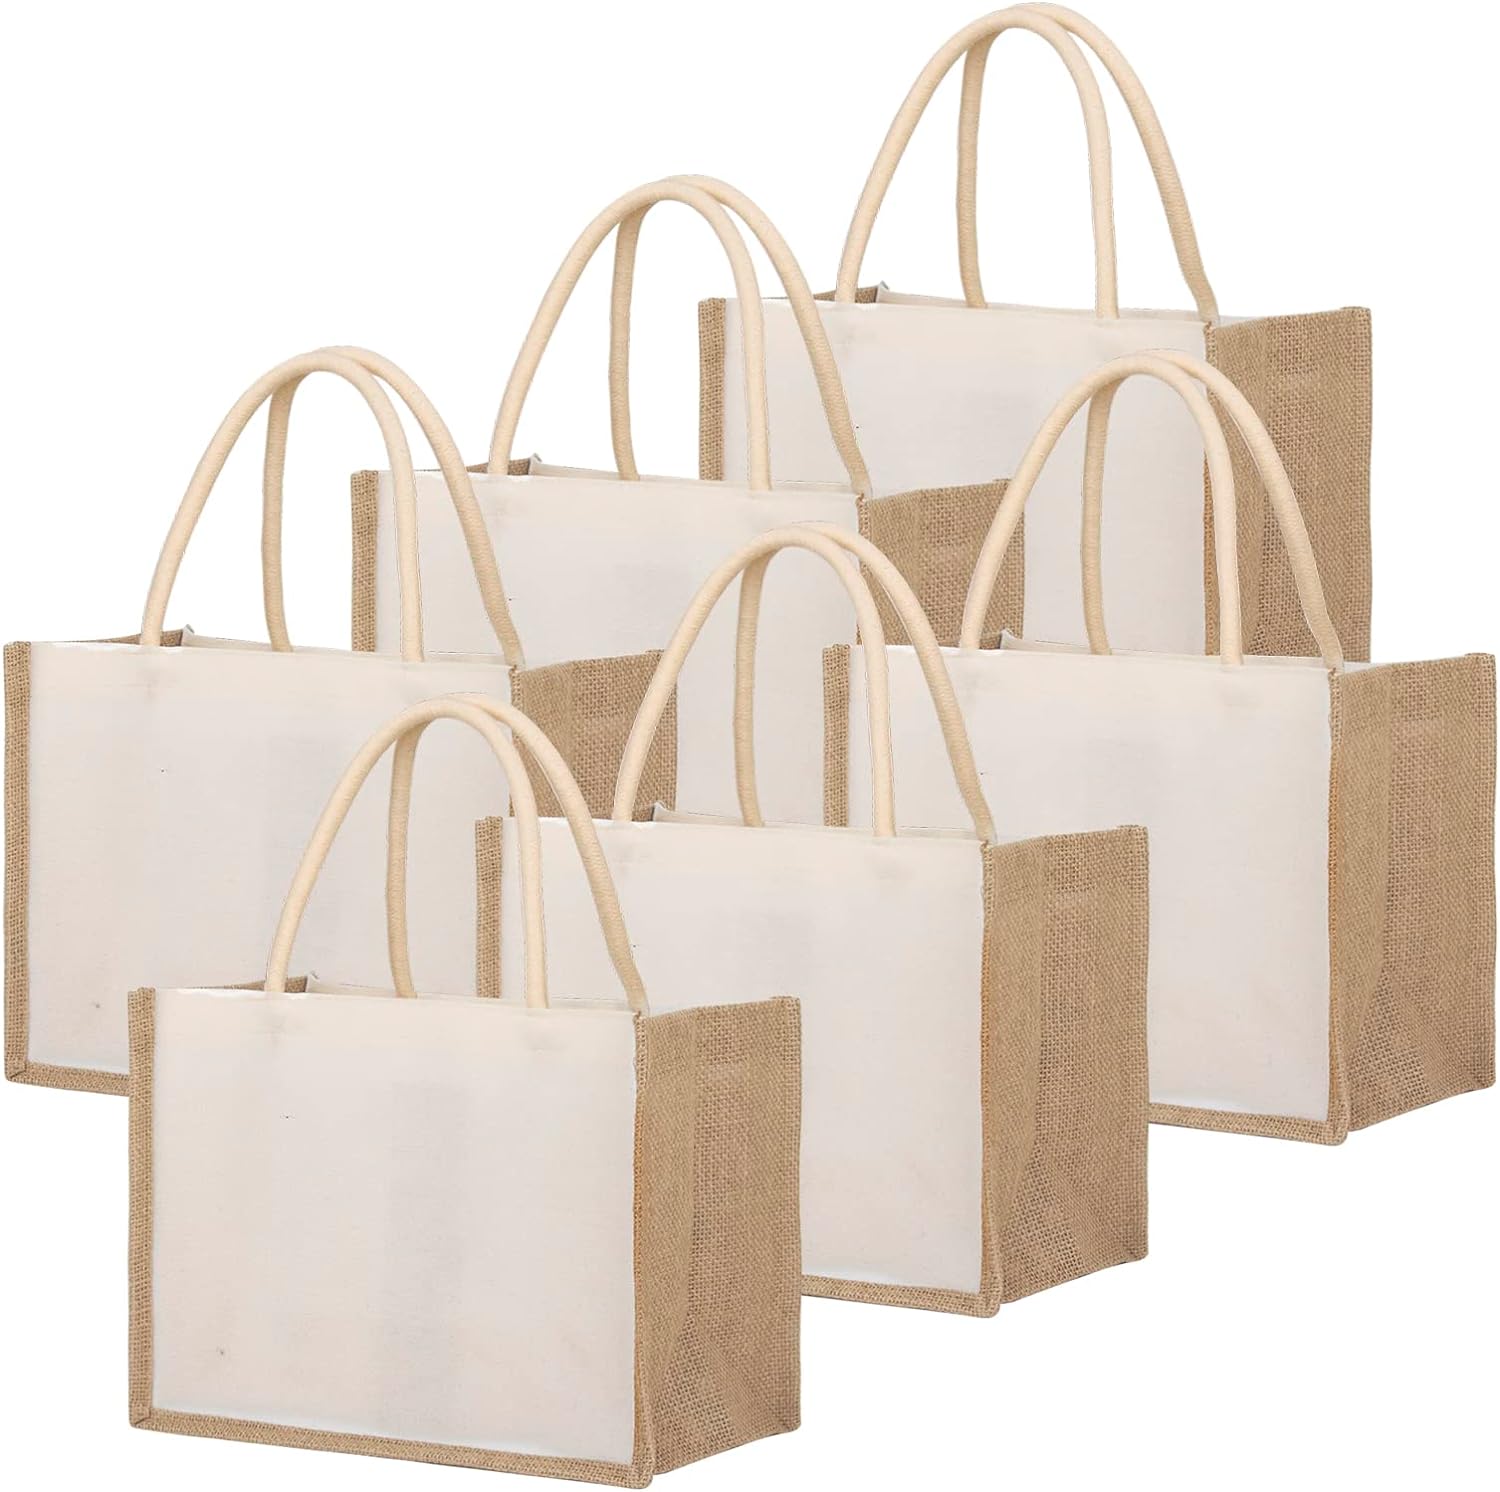 6 Pack Canvas Tote Bag with Cotton Handles BulkCrafting Blanks